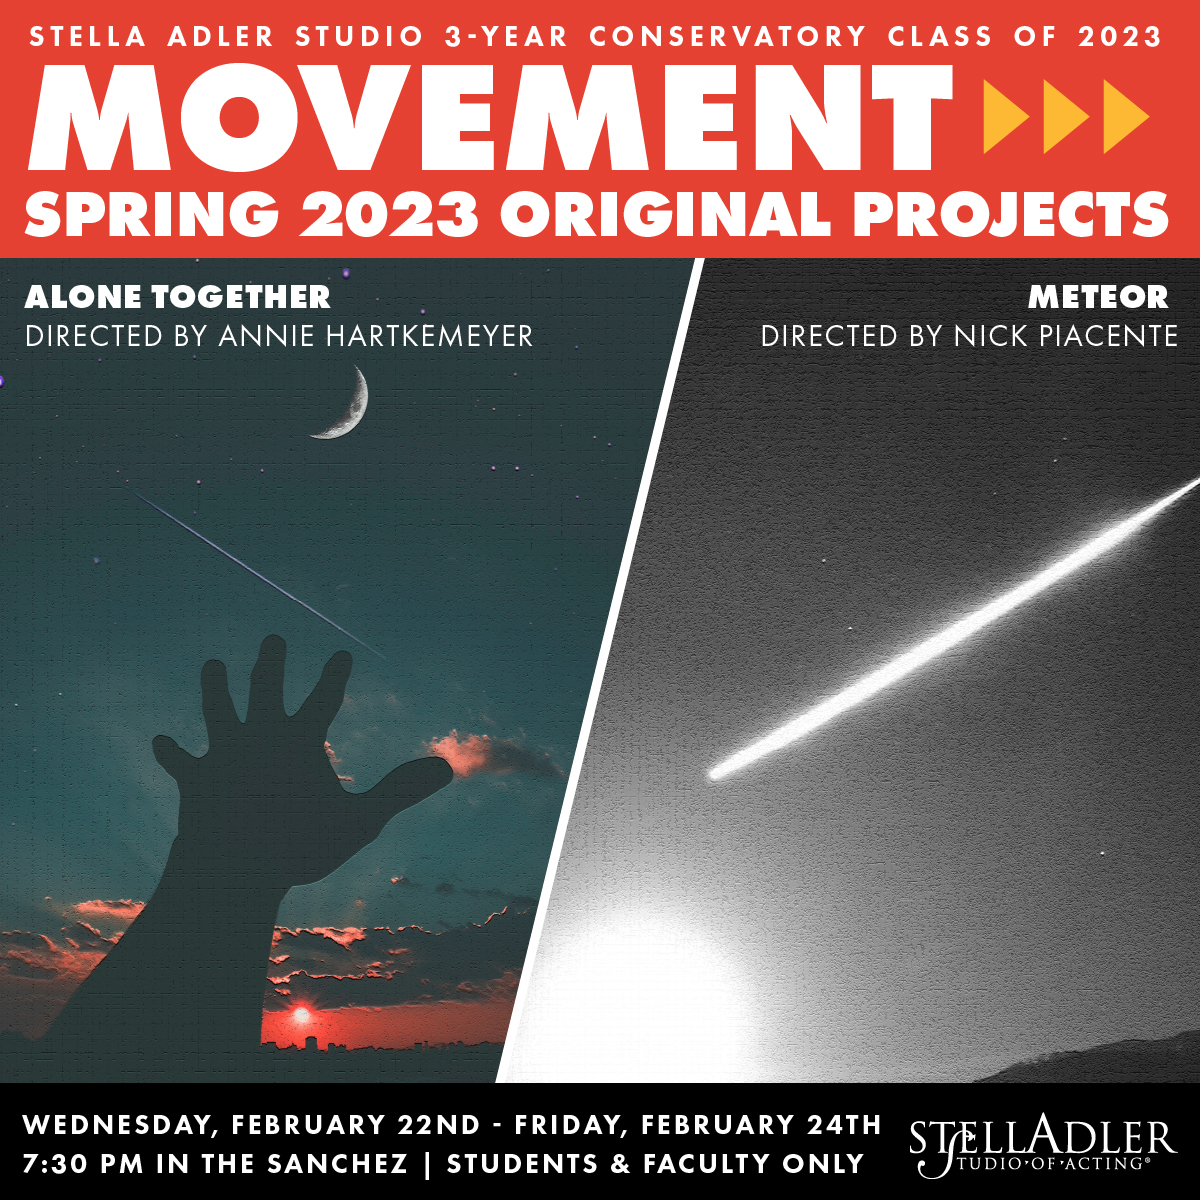 Poster for 3-Year Conservatory Class of 2023 Movement Projects